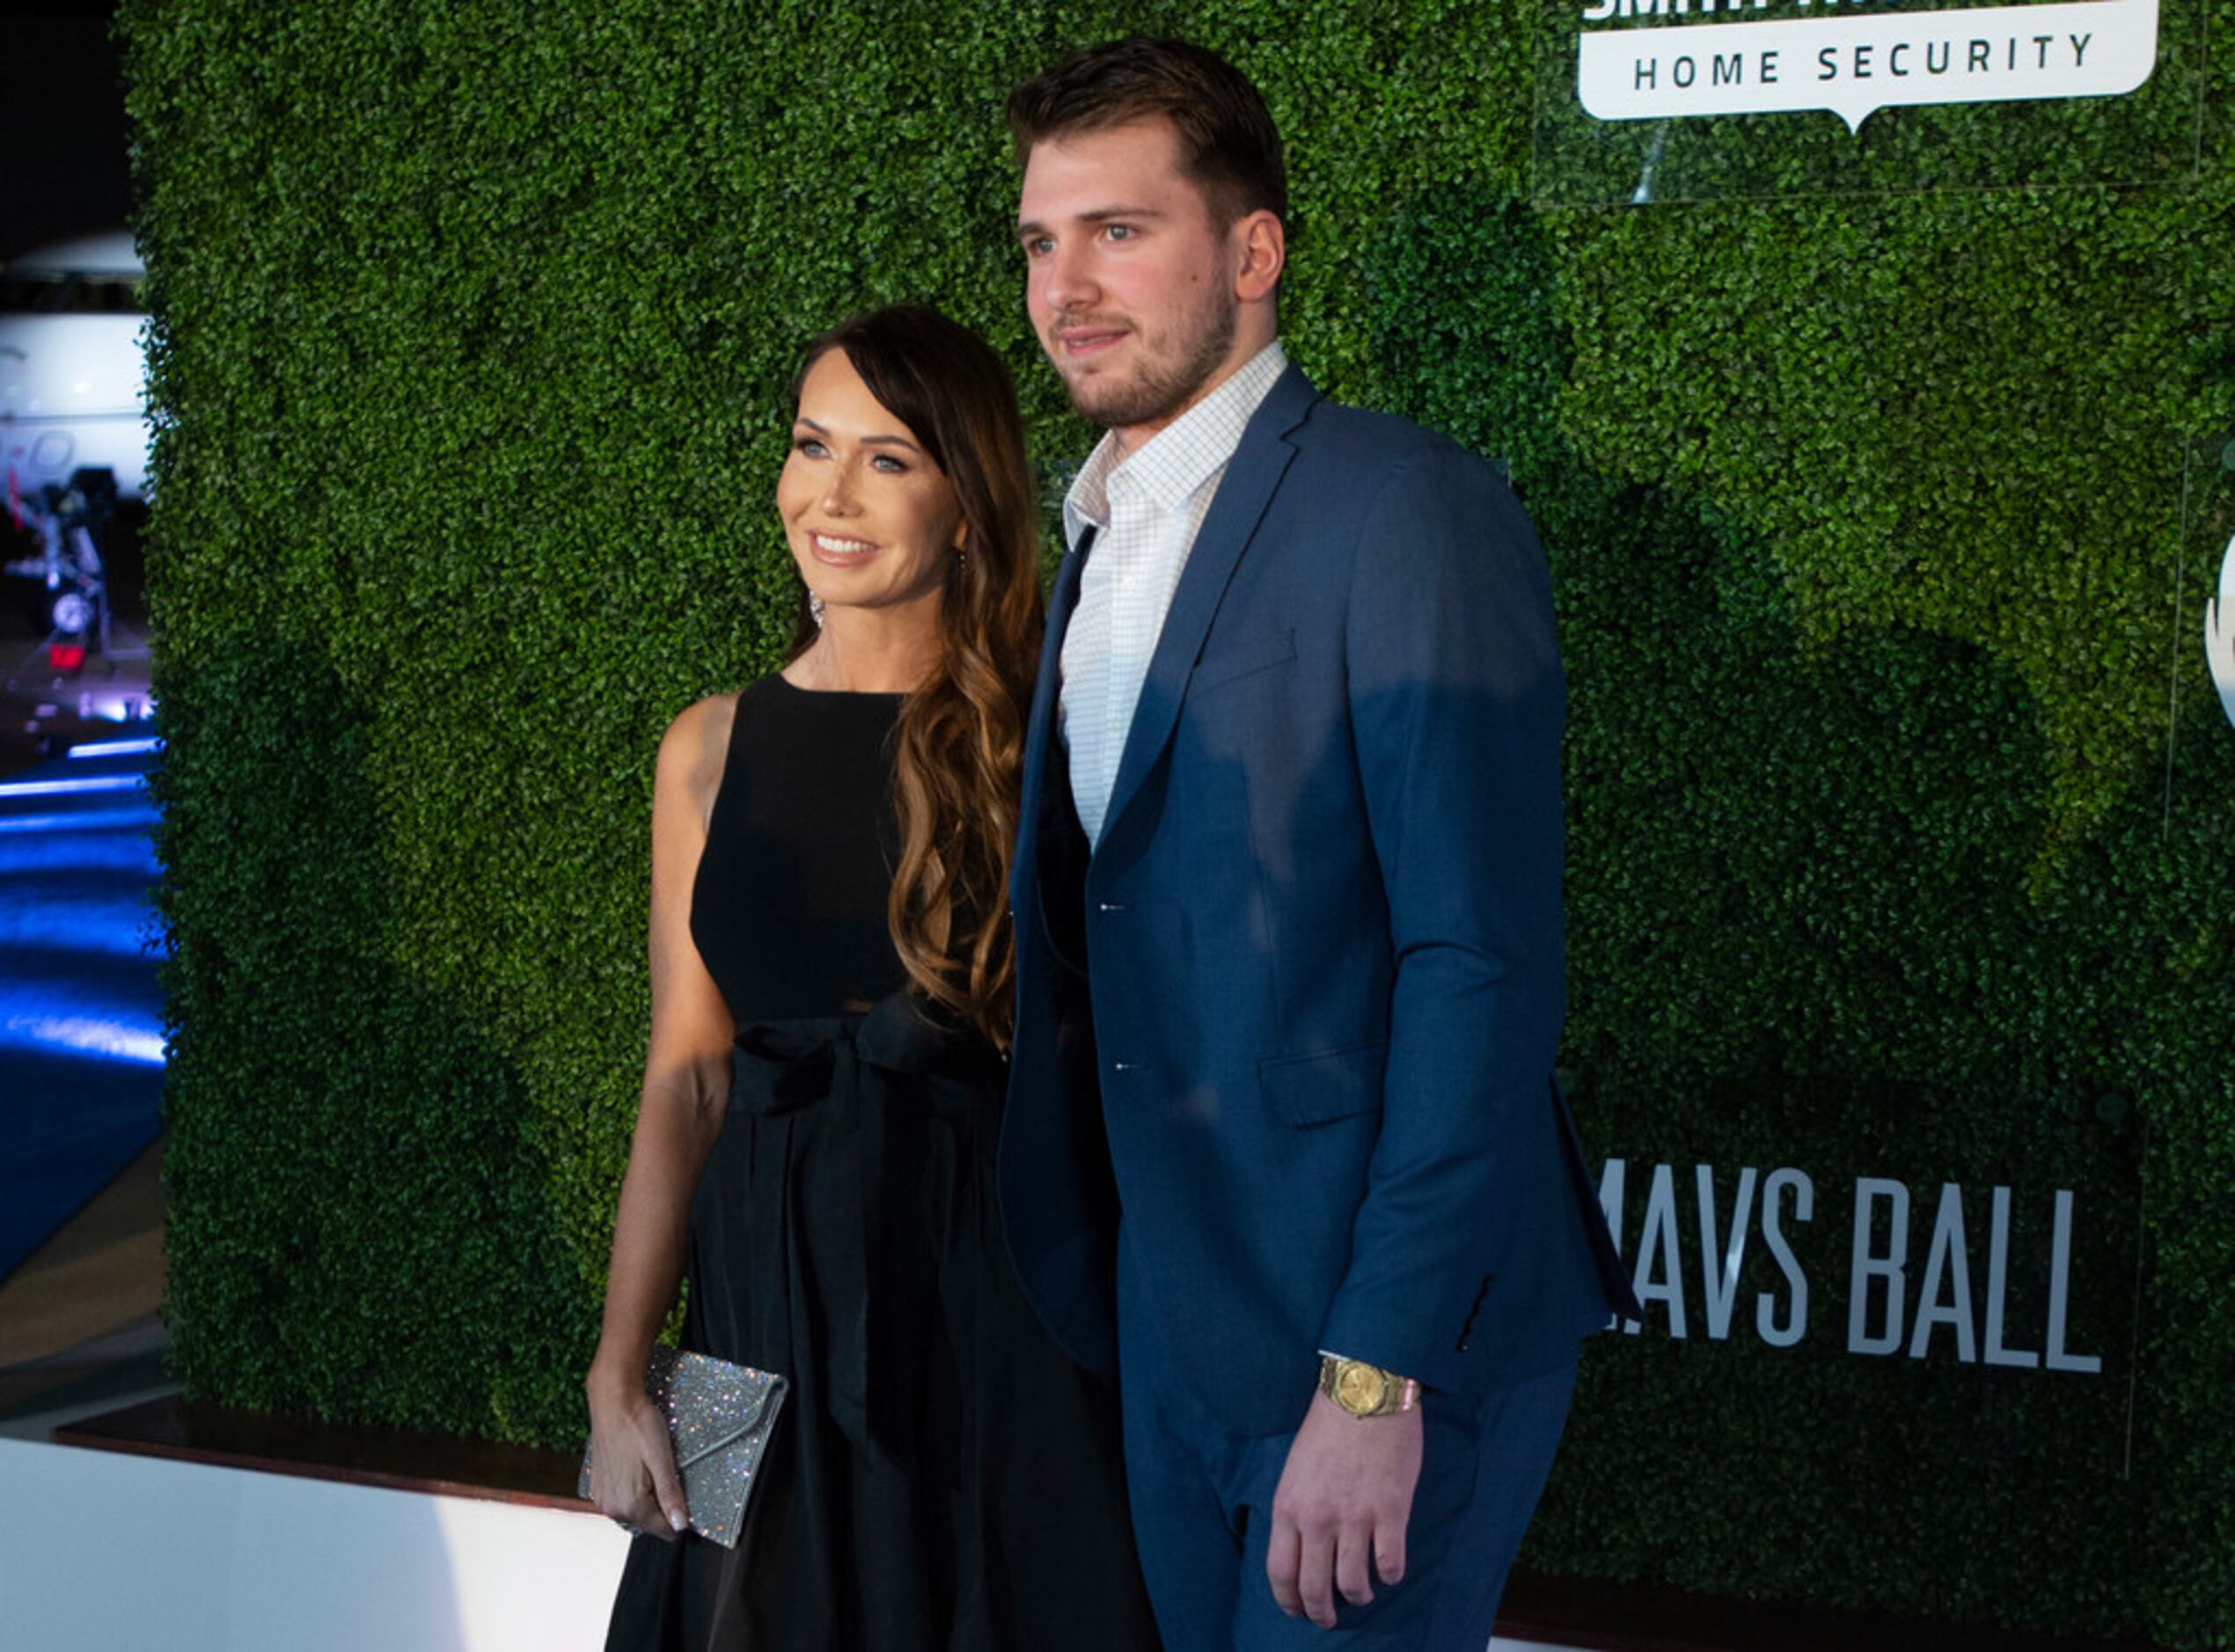 Mavs player Luka Doncic with friend on the blue carpet prior to the Mavs Ball Million Air in...